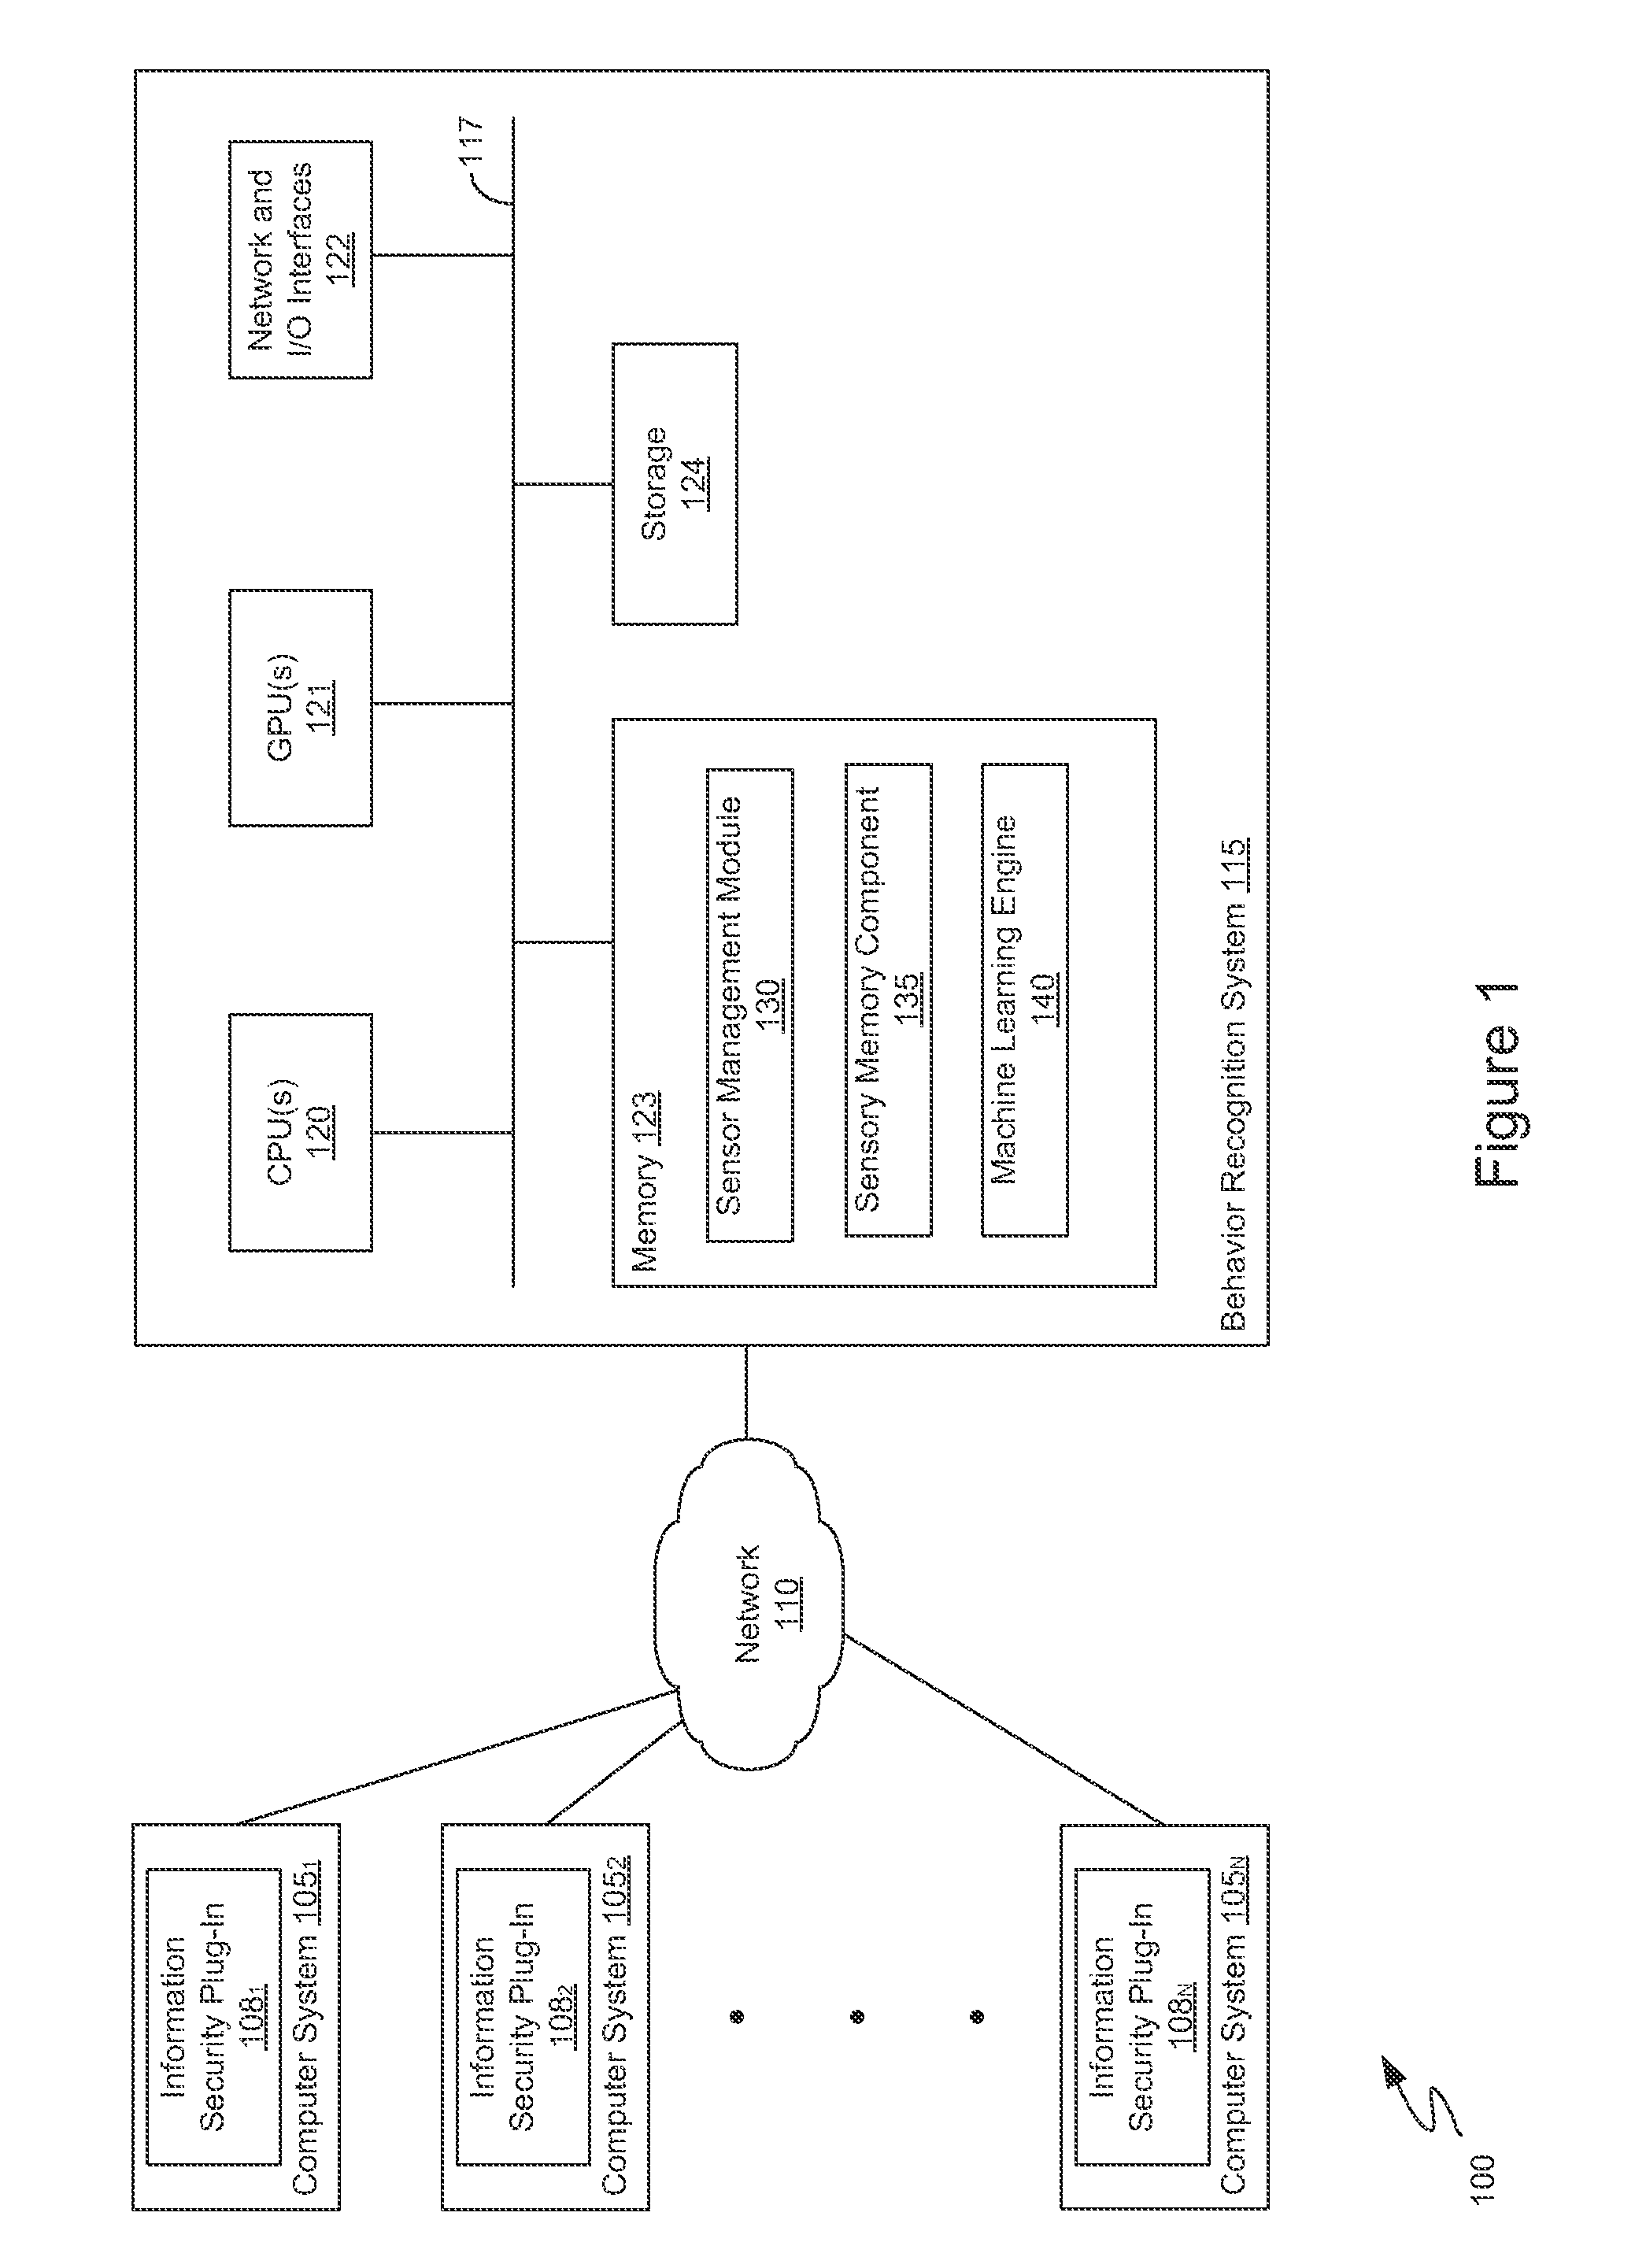 Cognitive information security using a behavioral recognition system